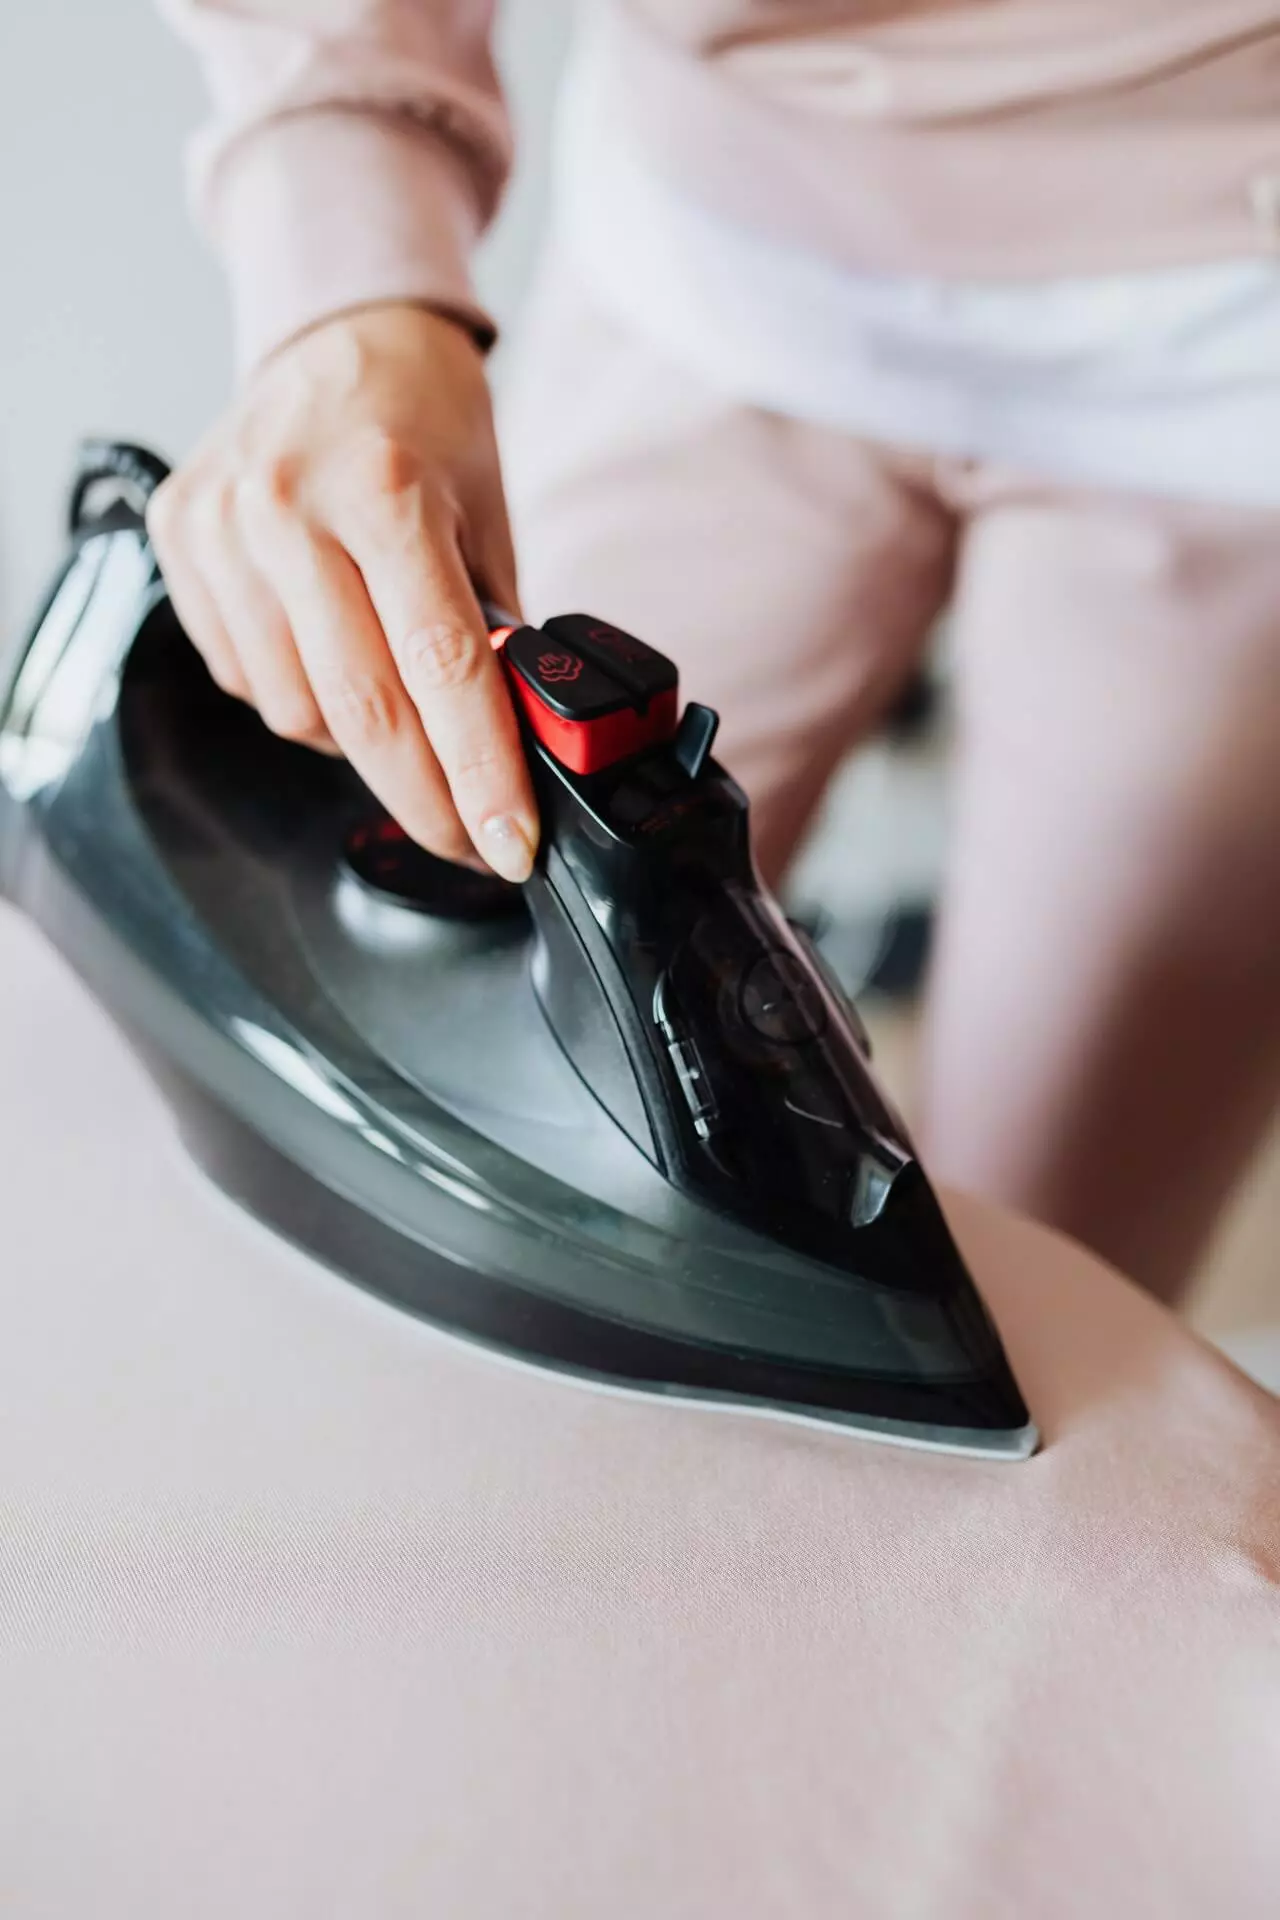 Ironing and Pressing. What's the Difference? Ironing: –The process